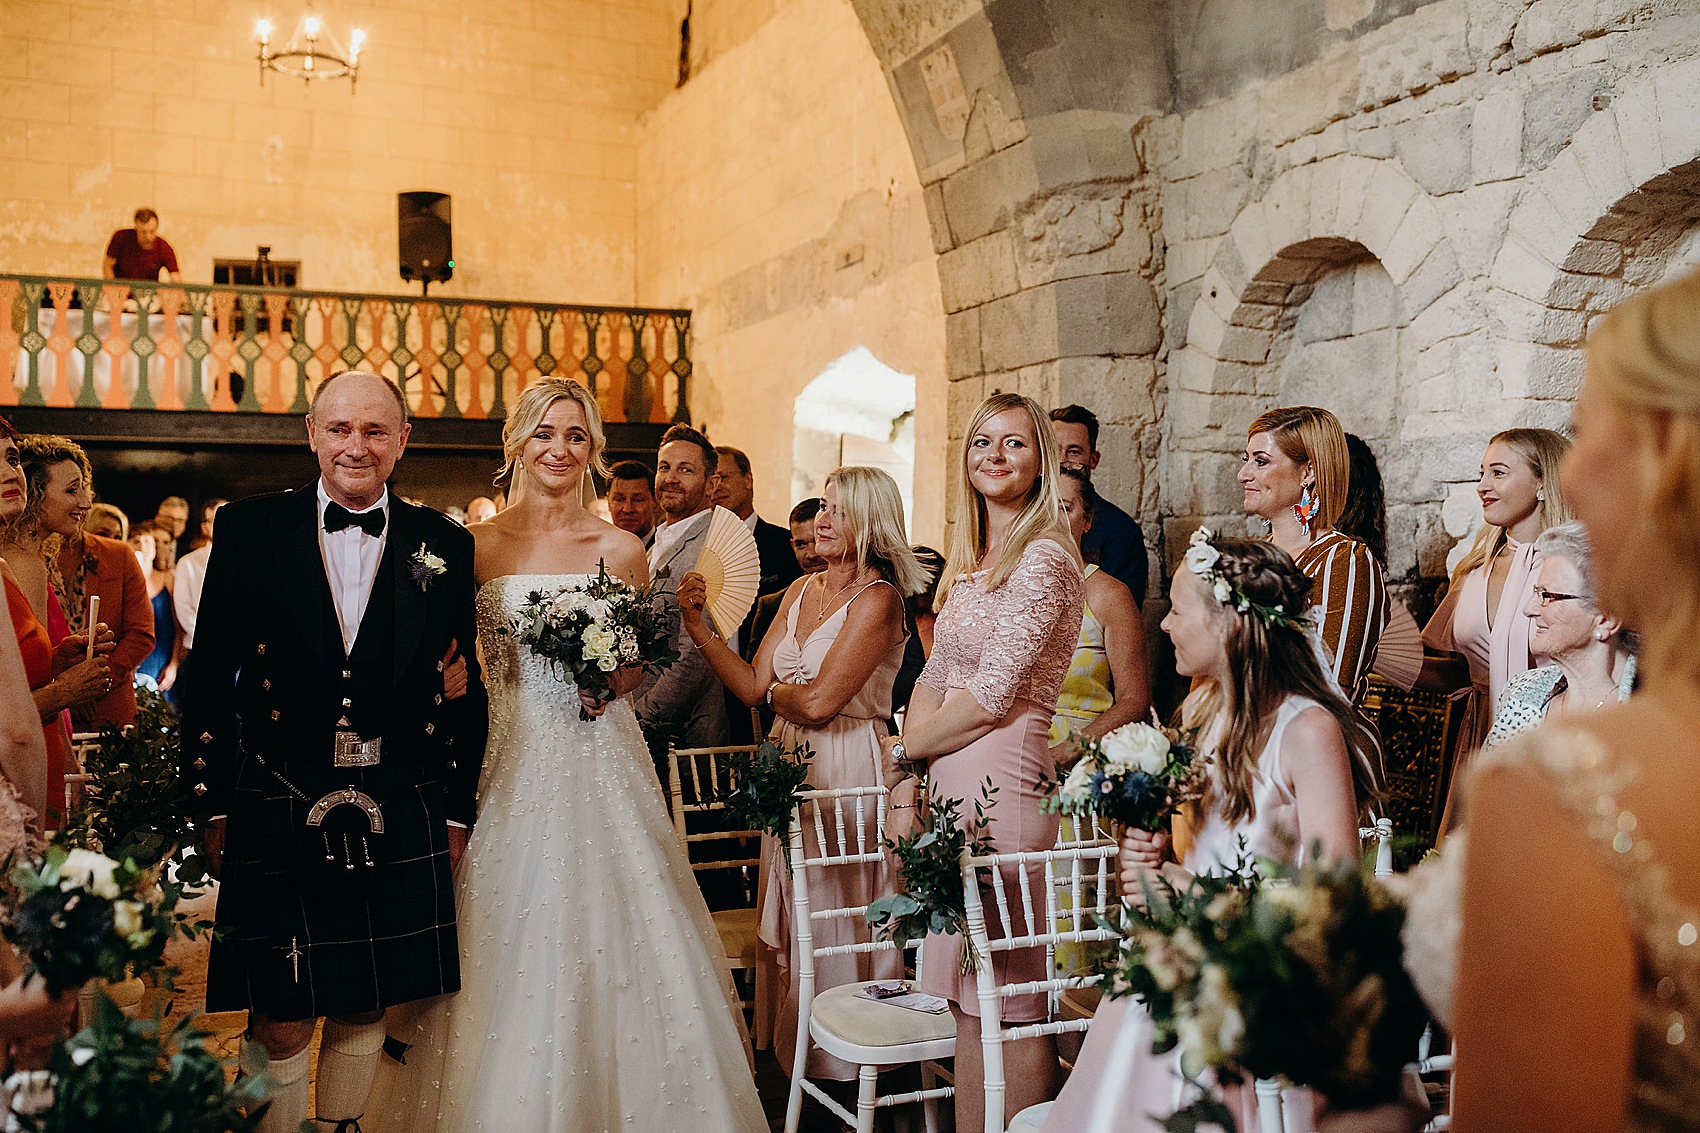 https://www.lovemydress.net/wp-content/uploads/2020/06/Two-brides-Sassi-Holford-French-Chateau-Wedding-23.jpg